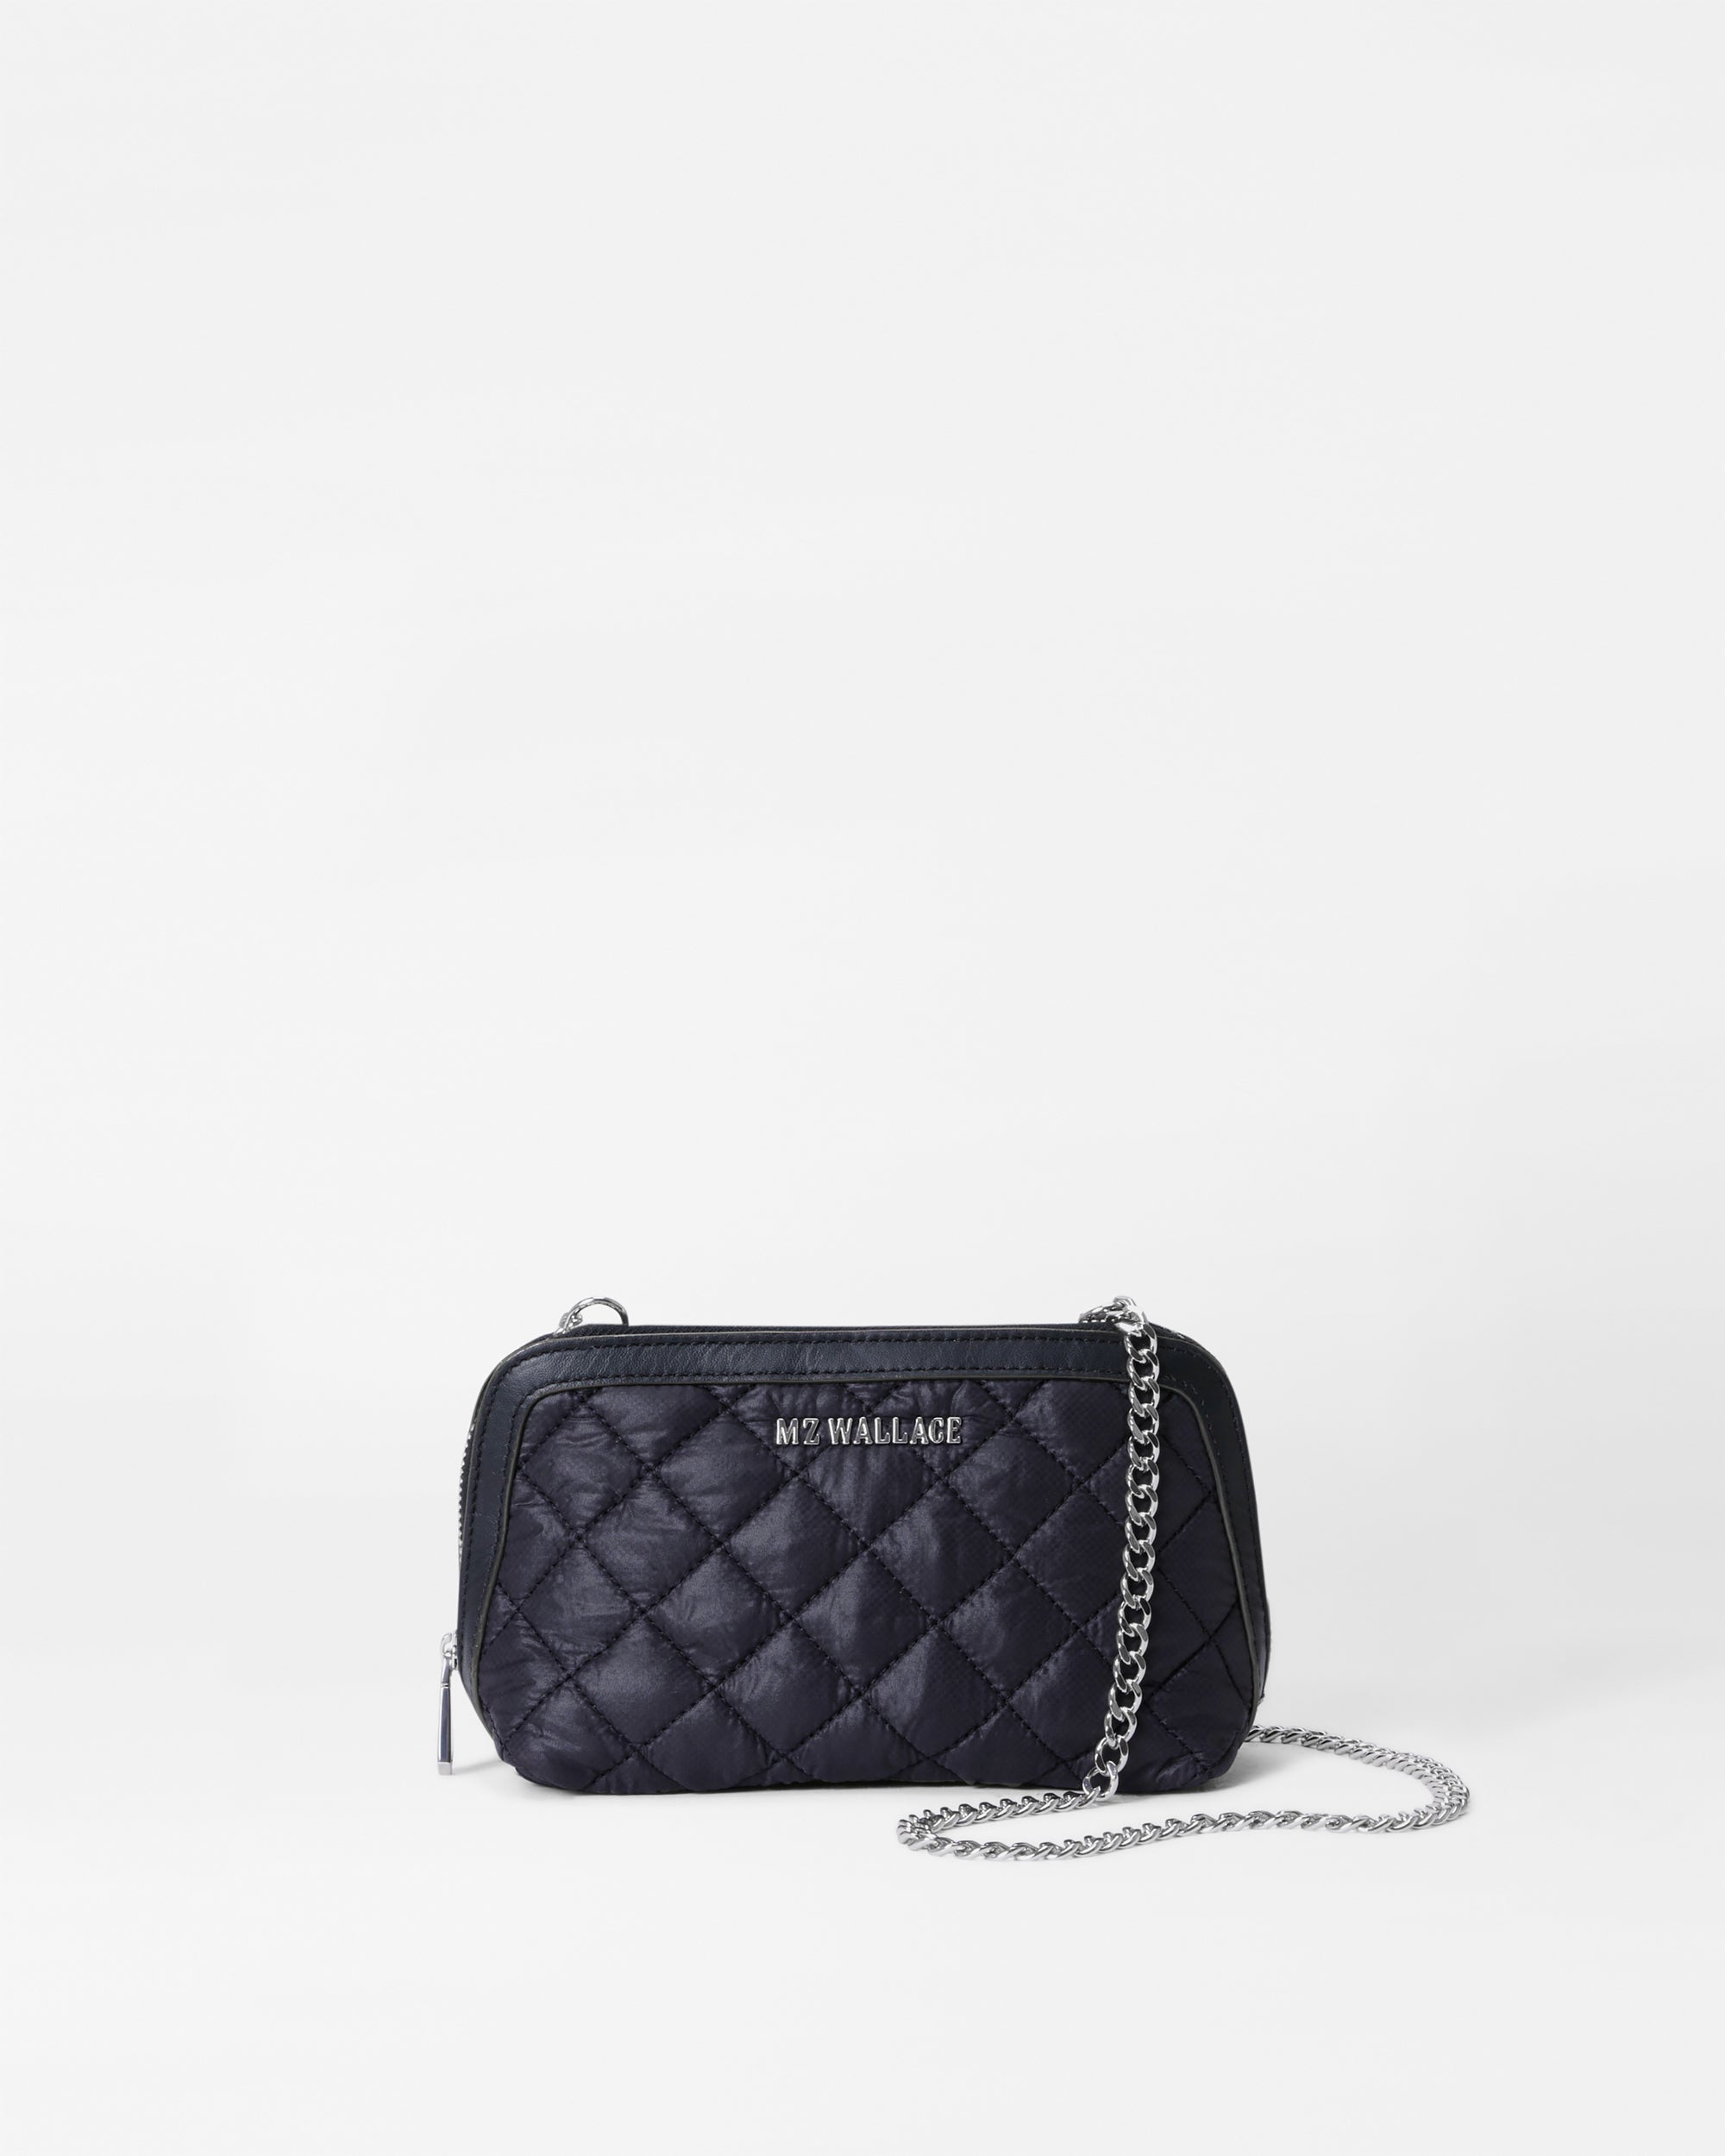 The Kooples Small Leather Emily Cross-body Bag - Silver - One Size